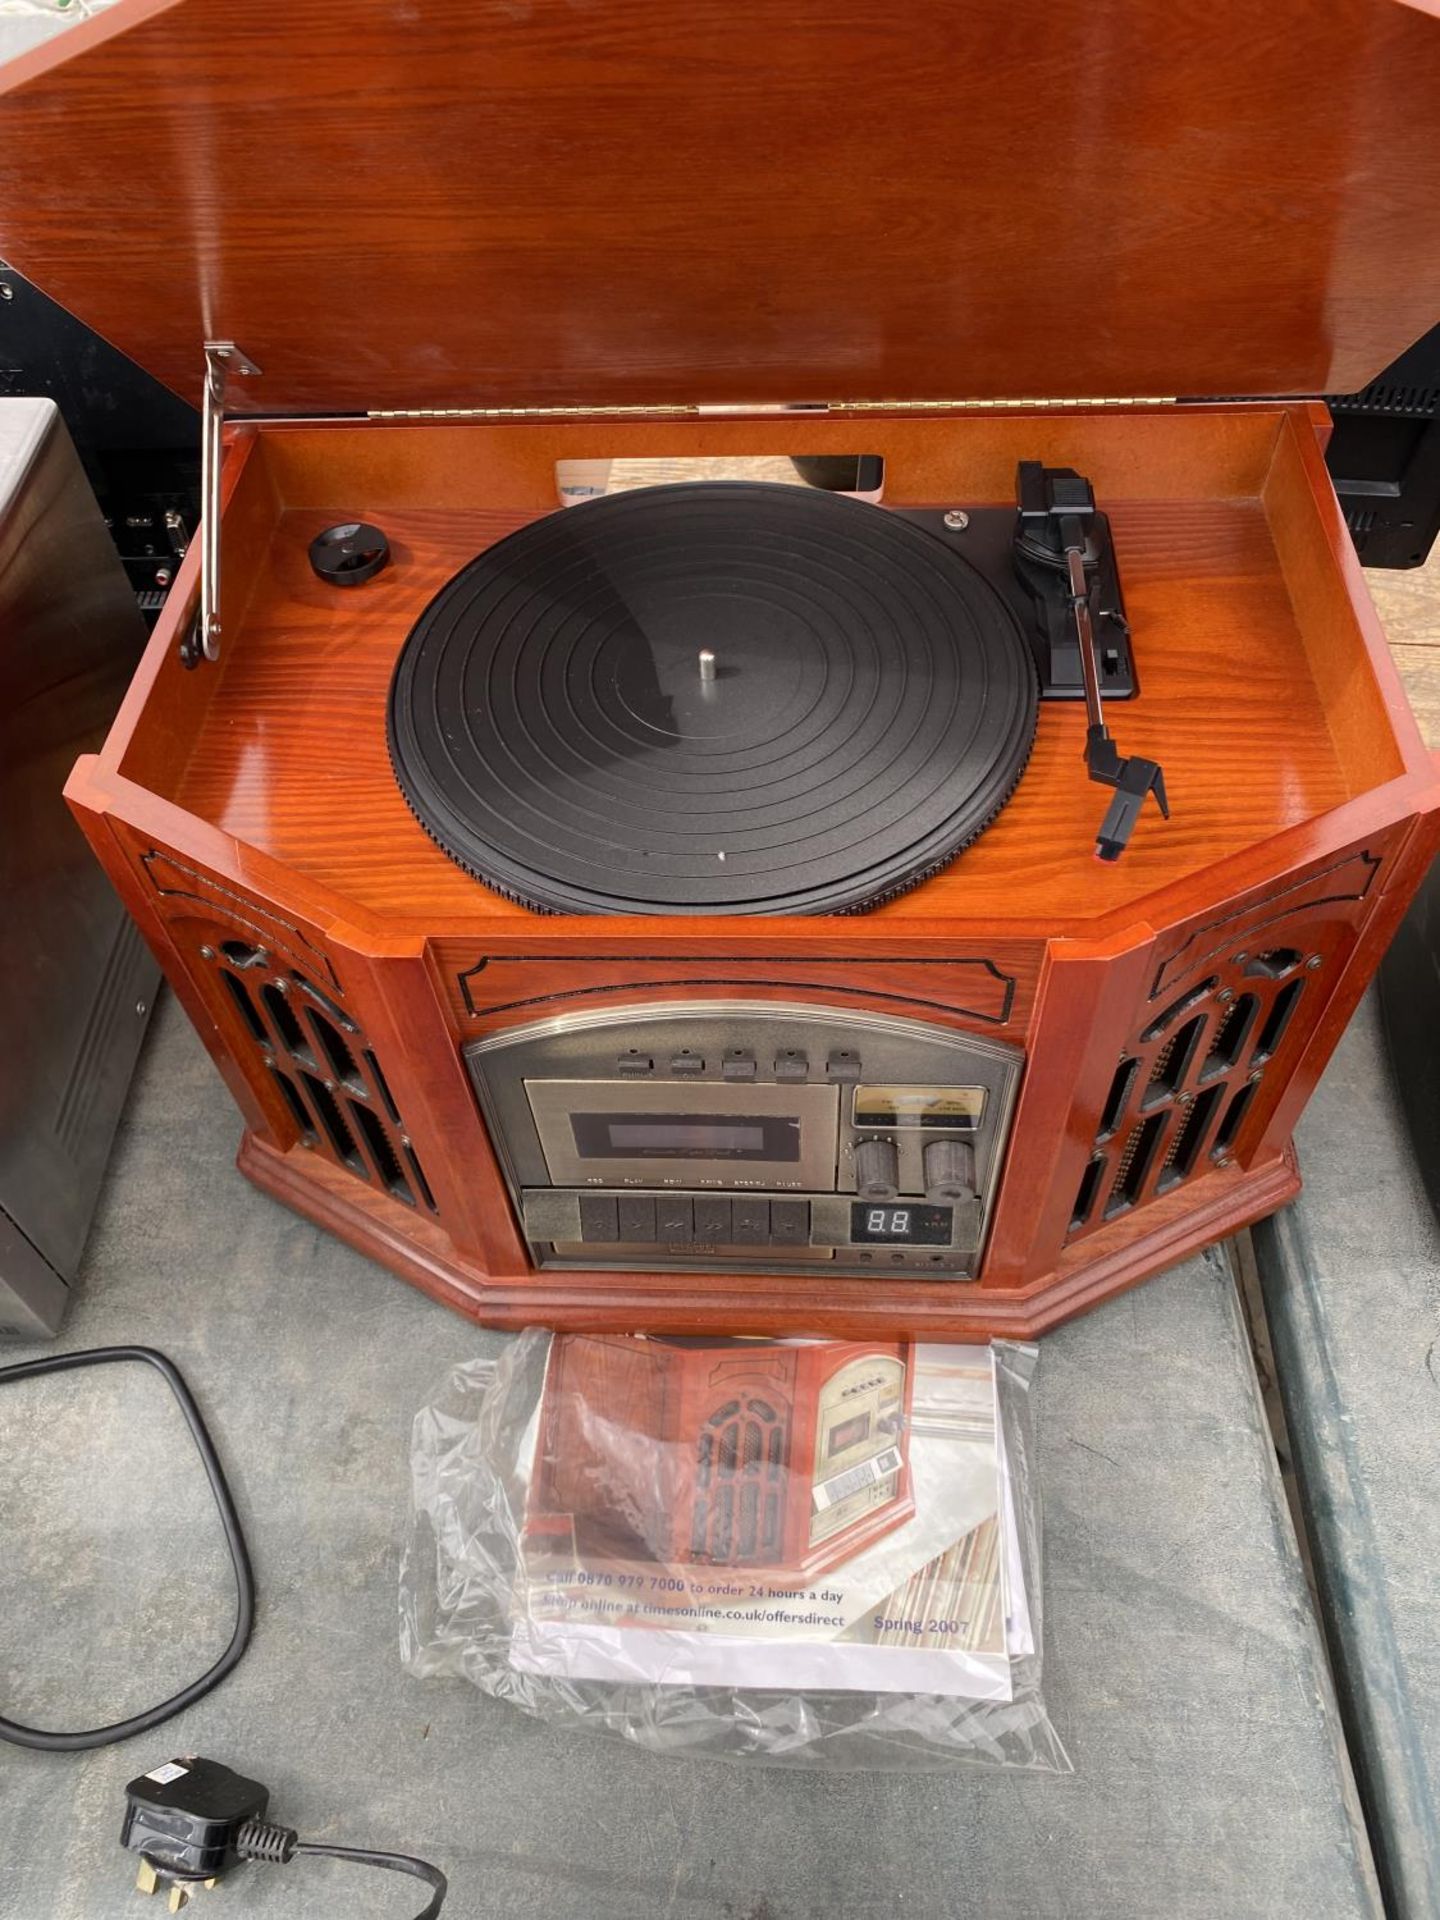 A RETRO STYLE PORTABLE RECORD PLAYER - Image 3 of 3